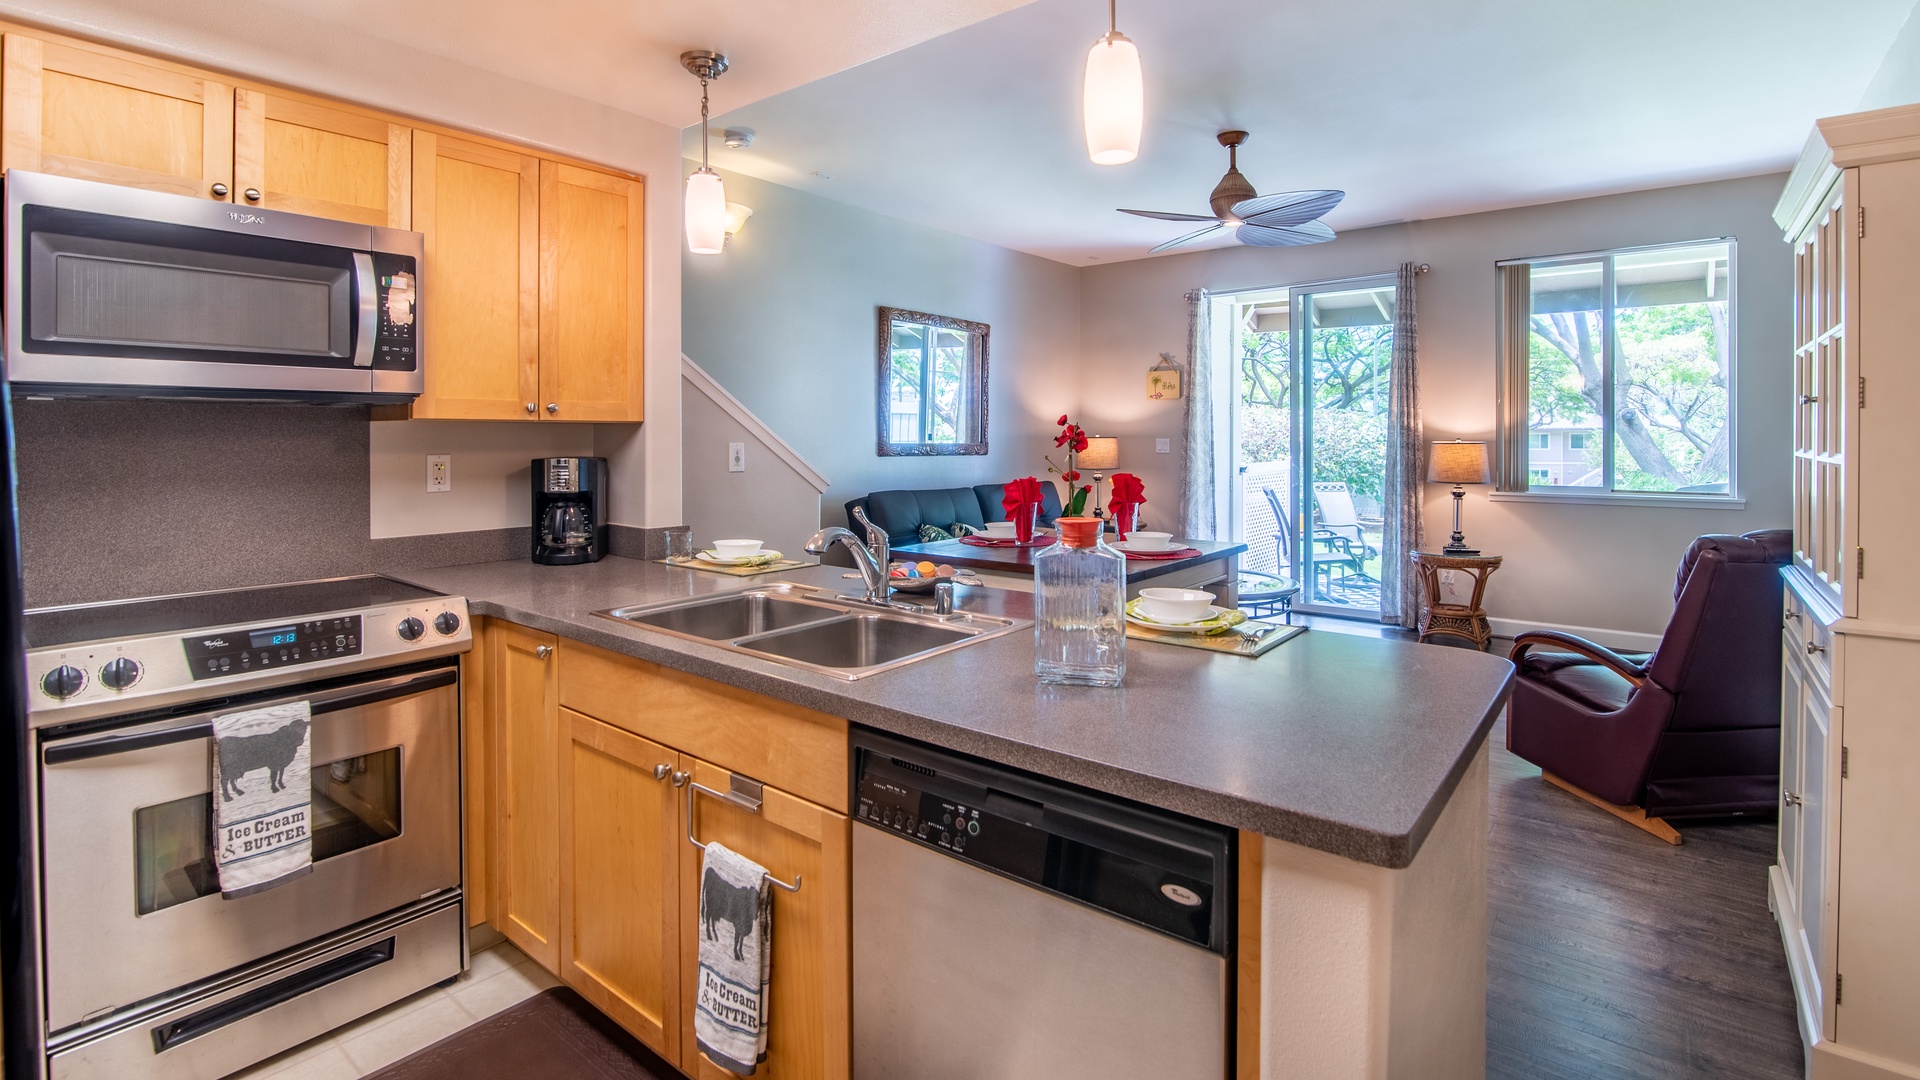 Kapolei Vacation Rentals, Hillside Villas 1538-2 - A beautiful kitchen with stainless steel appliances and a view.